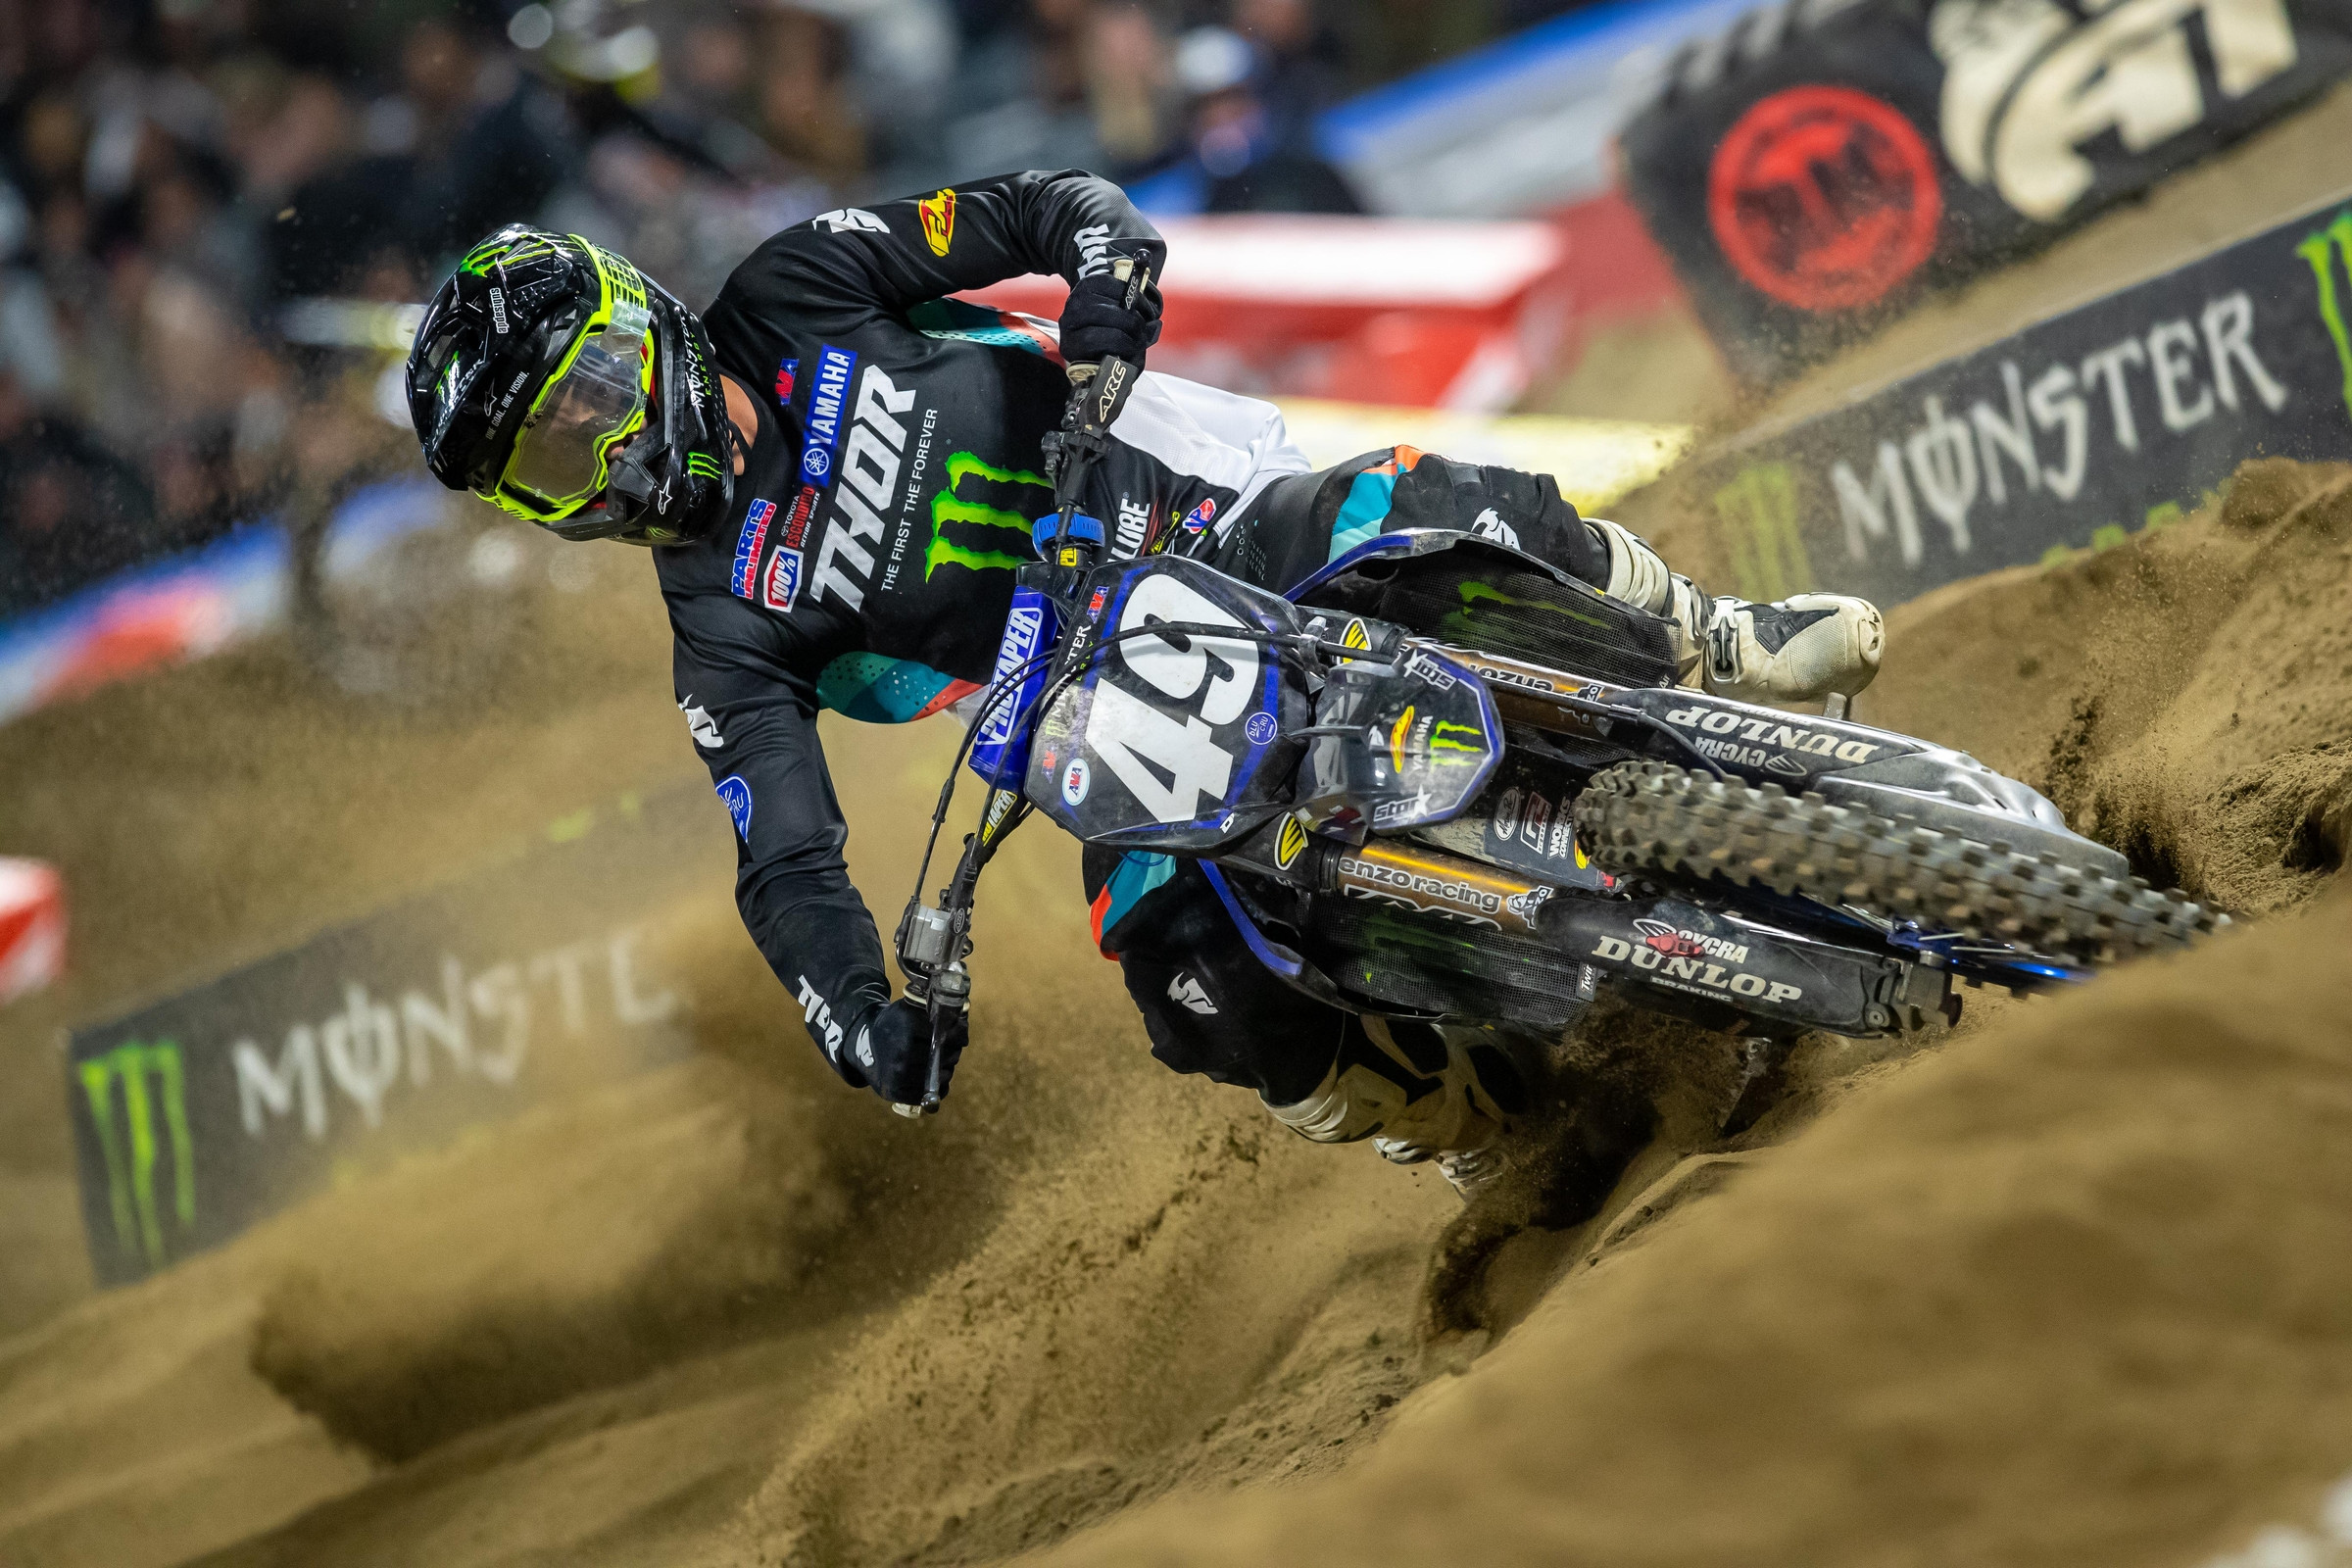 How to Watch Altana Supercross Day Race on TV